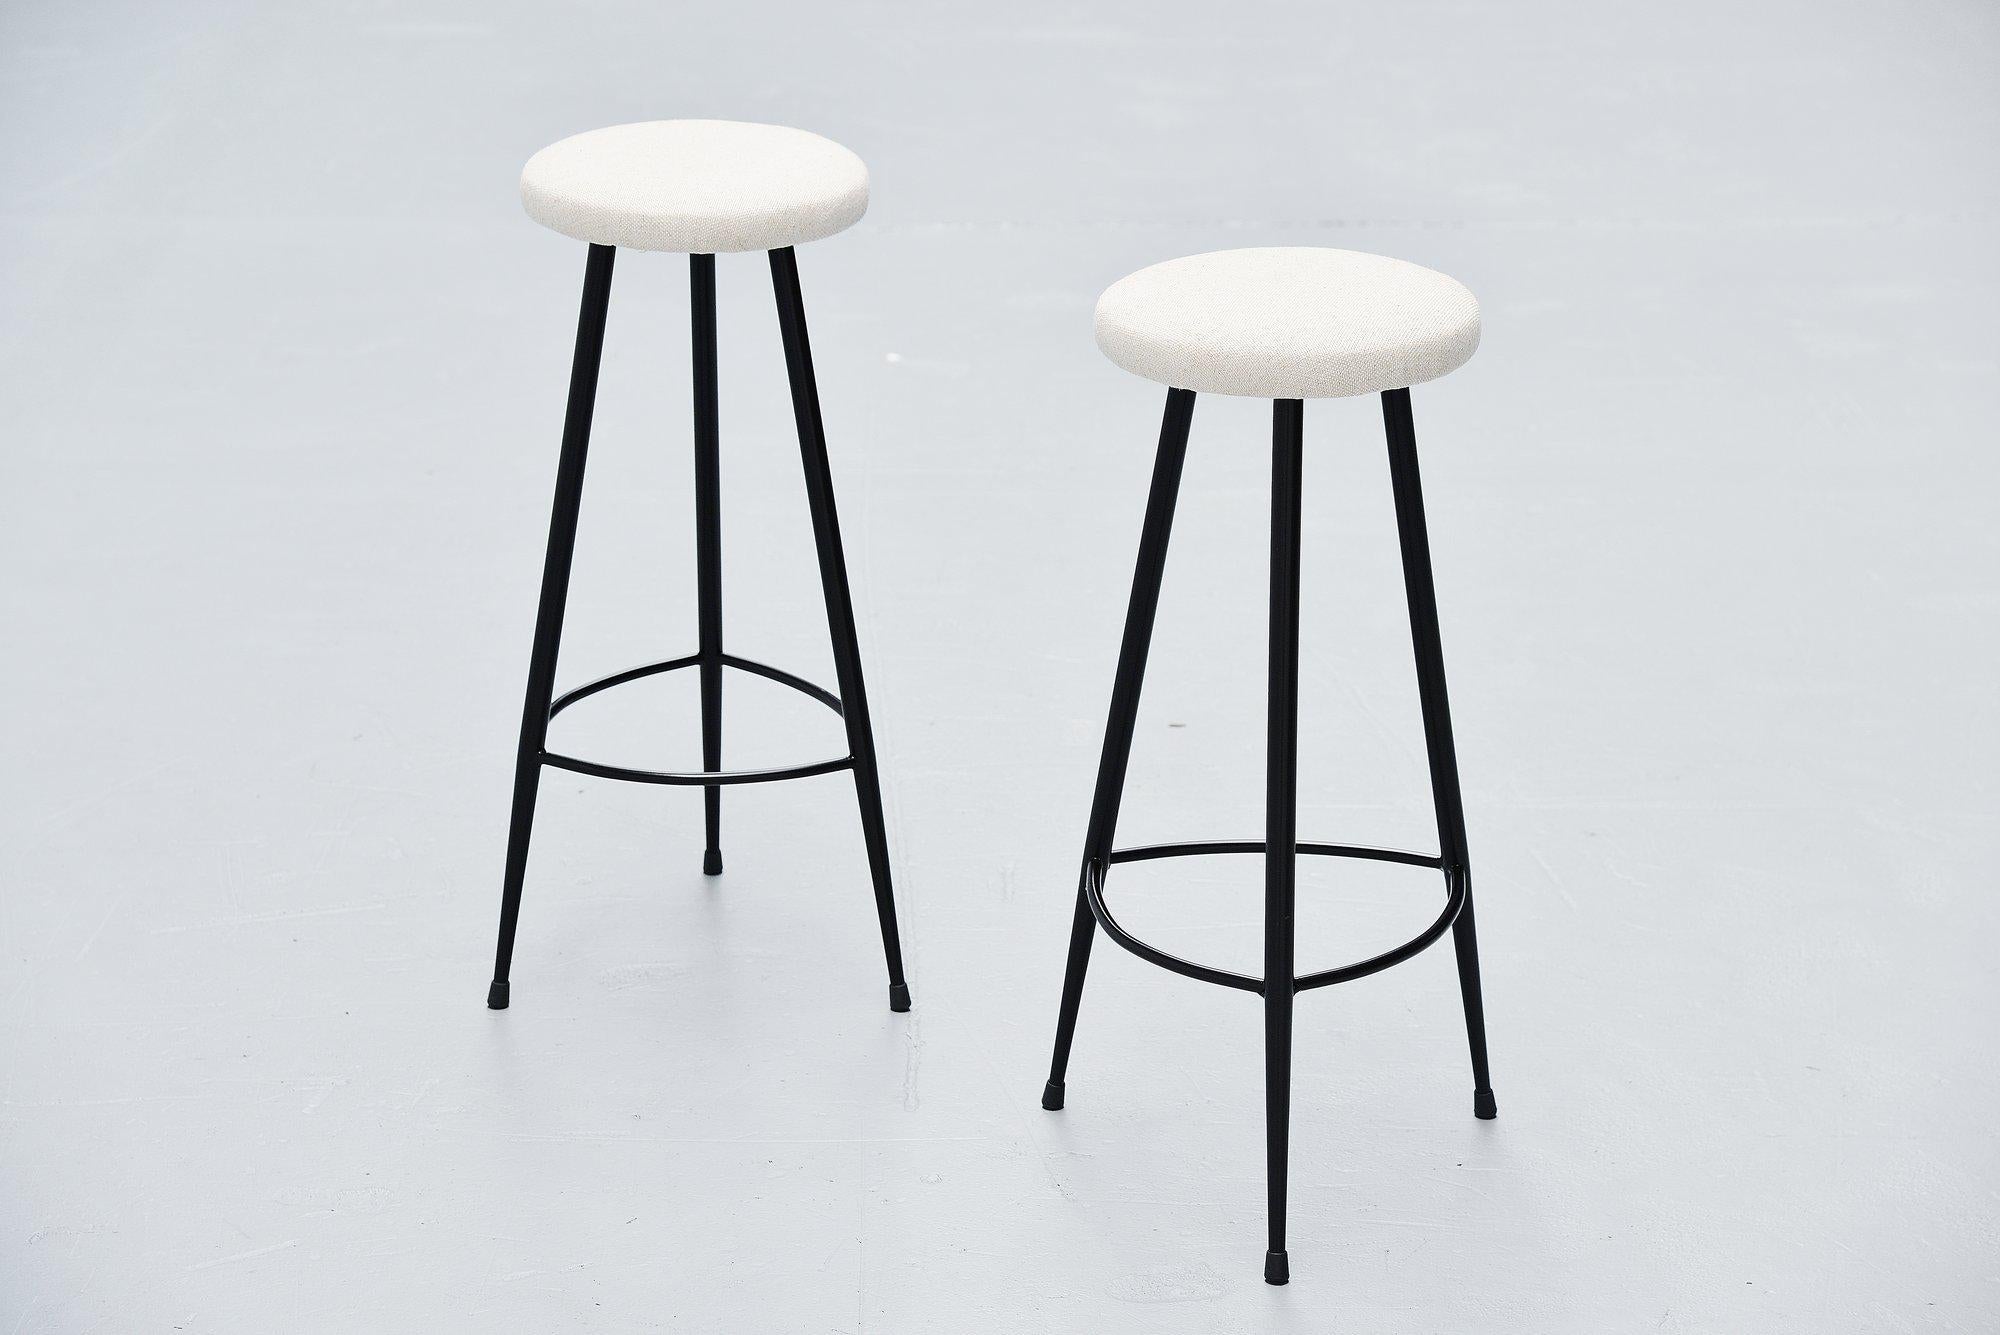 Cold-Painted Italian Pair of Modernist Bar Stools, Italy, 1950